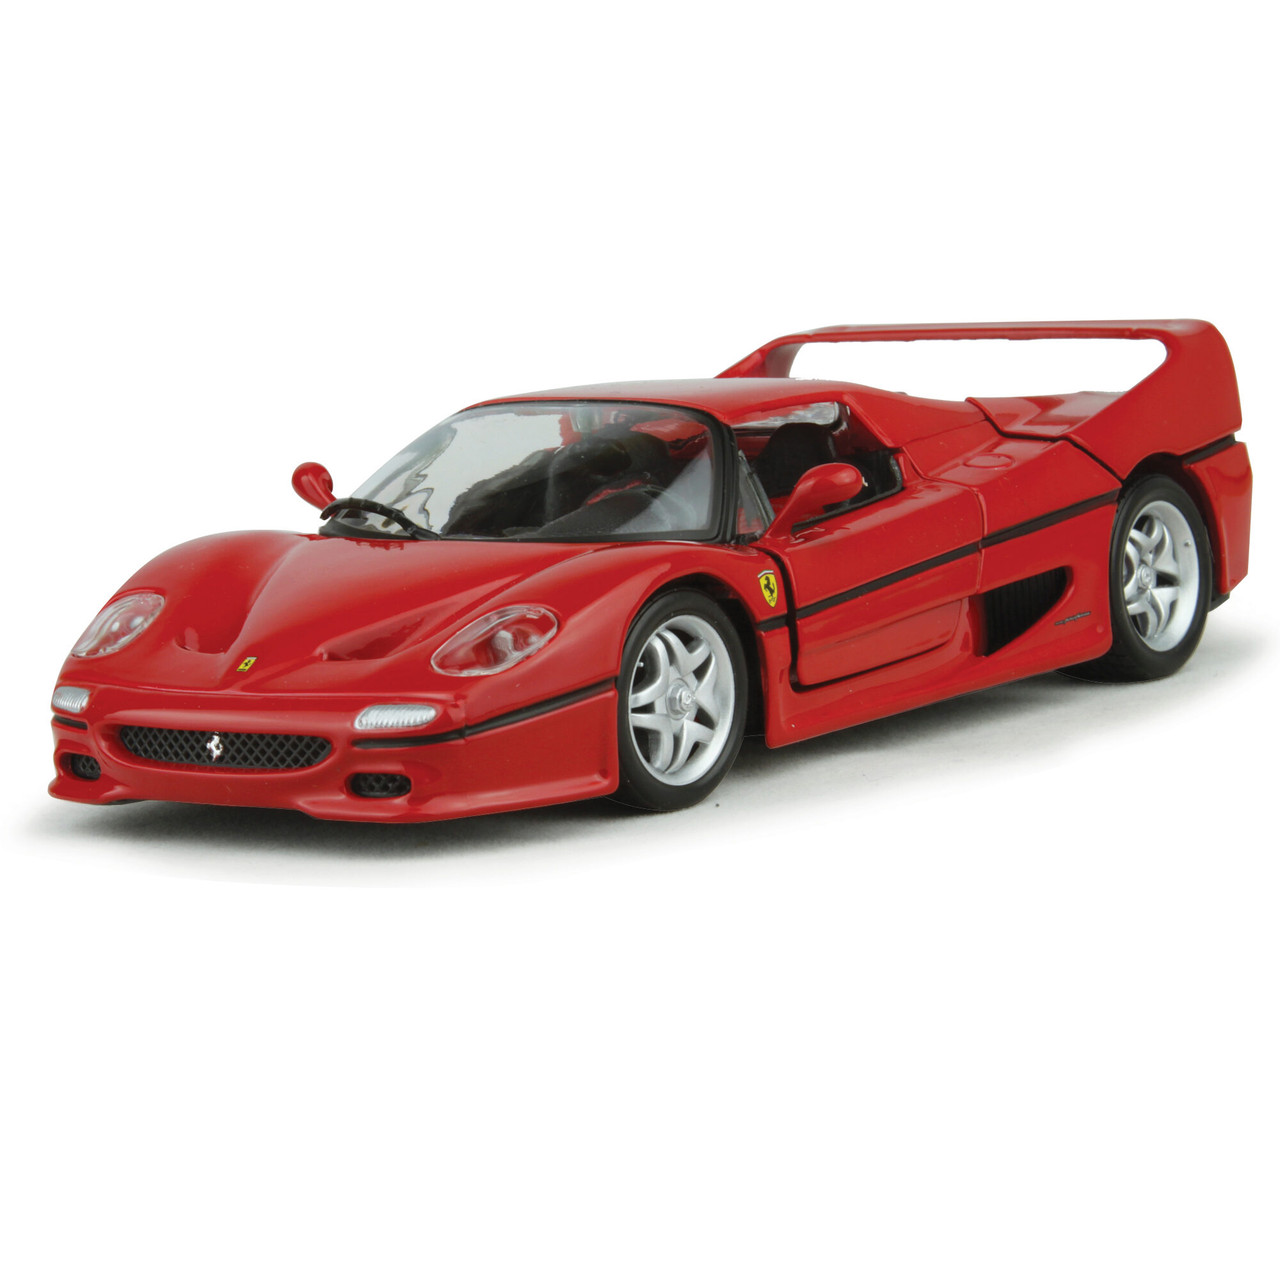 Pool Evenement Begrafenis Ferrari F50 1:24 Scale Diecast Model by Bburago | Fairfield Collectibles -  The #1 Source For High Quality Diecast Scale Model Cars